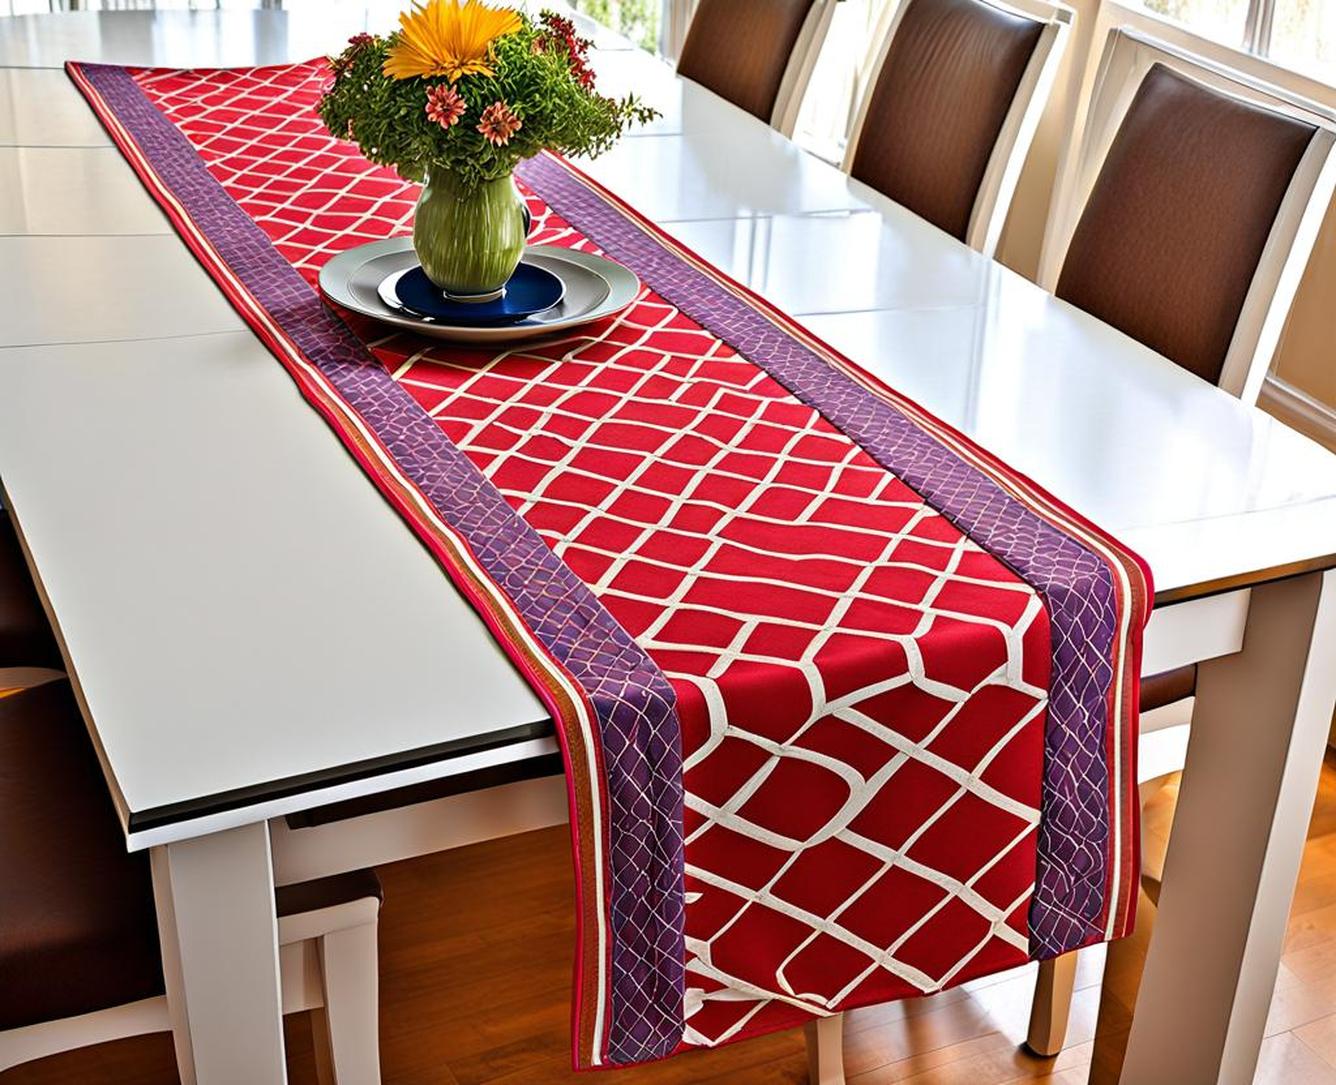 how long is a table runner